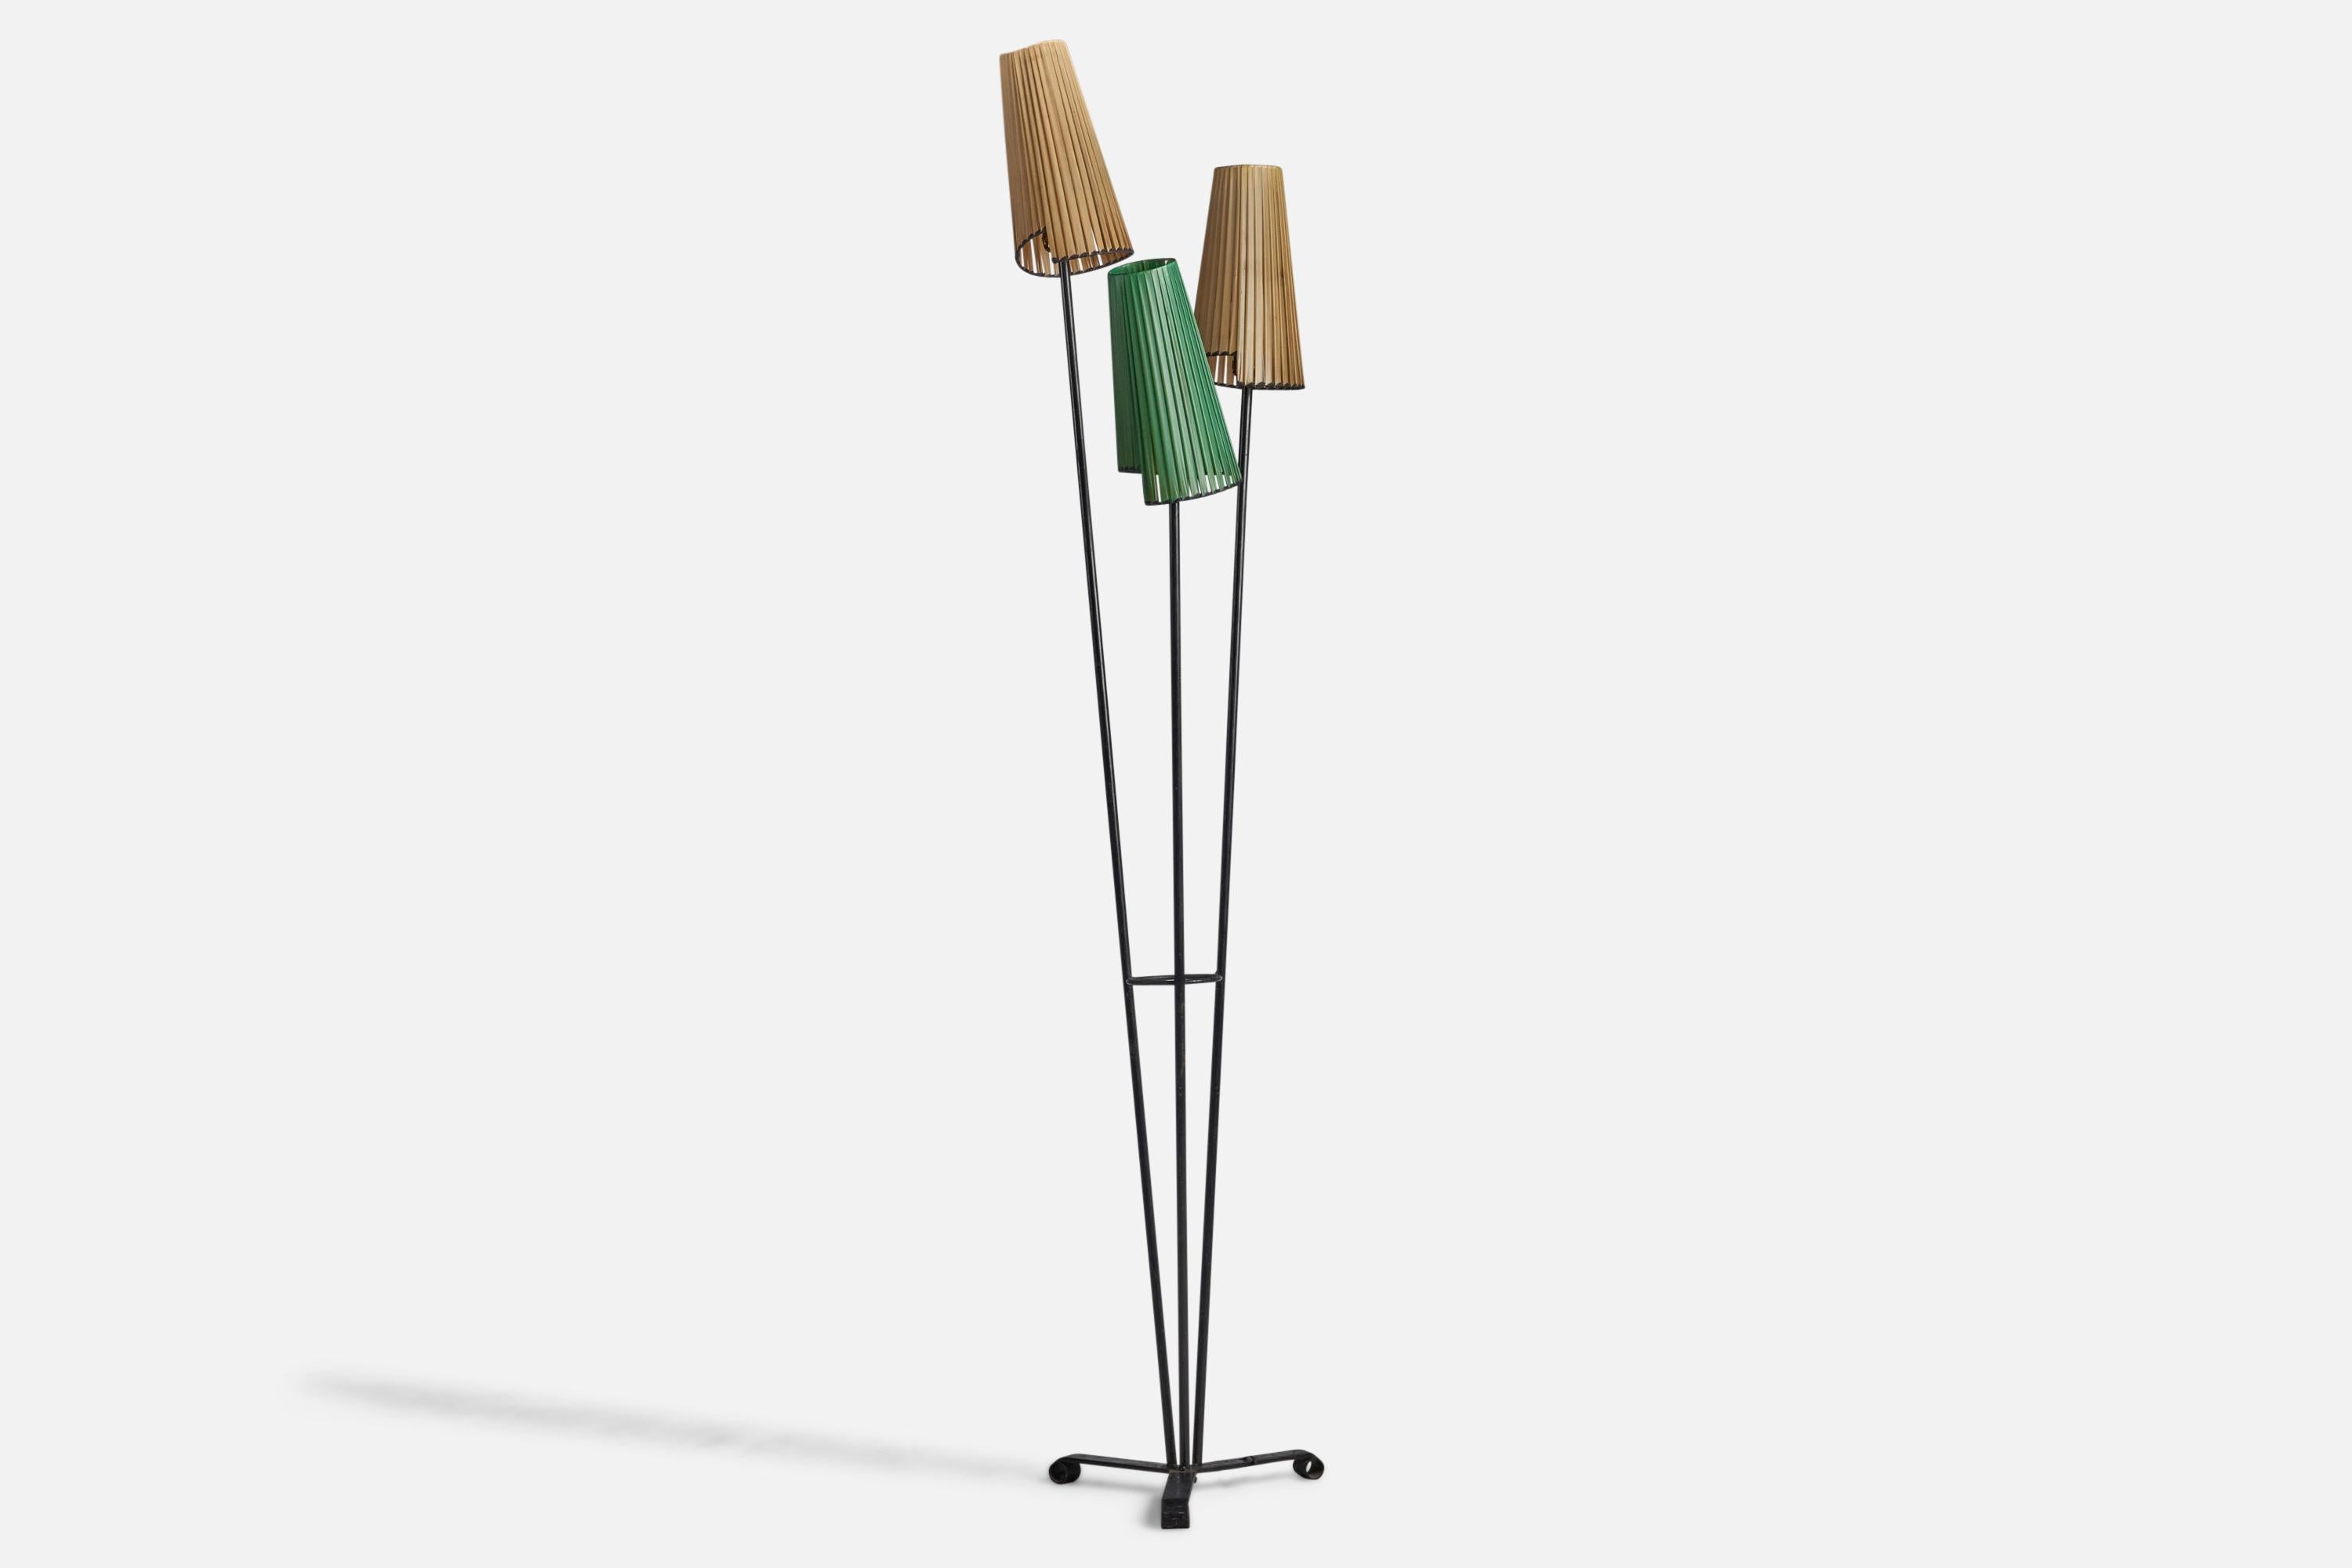 A large black-lacquered iron and beige and green rubber band floor lamp designed and produced in France, c. 1950s.

Overall Dimensions (inches): 84.5” H x 17.5” Diameter

Bulb Specifications: E-26 Bulb

Number of Sockets: 3

All lighting will be